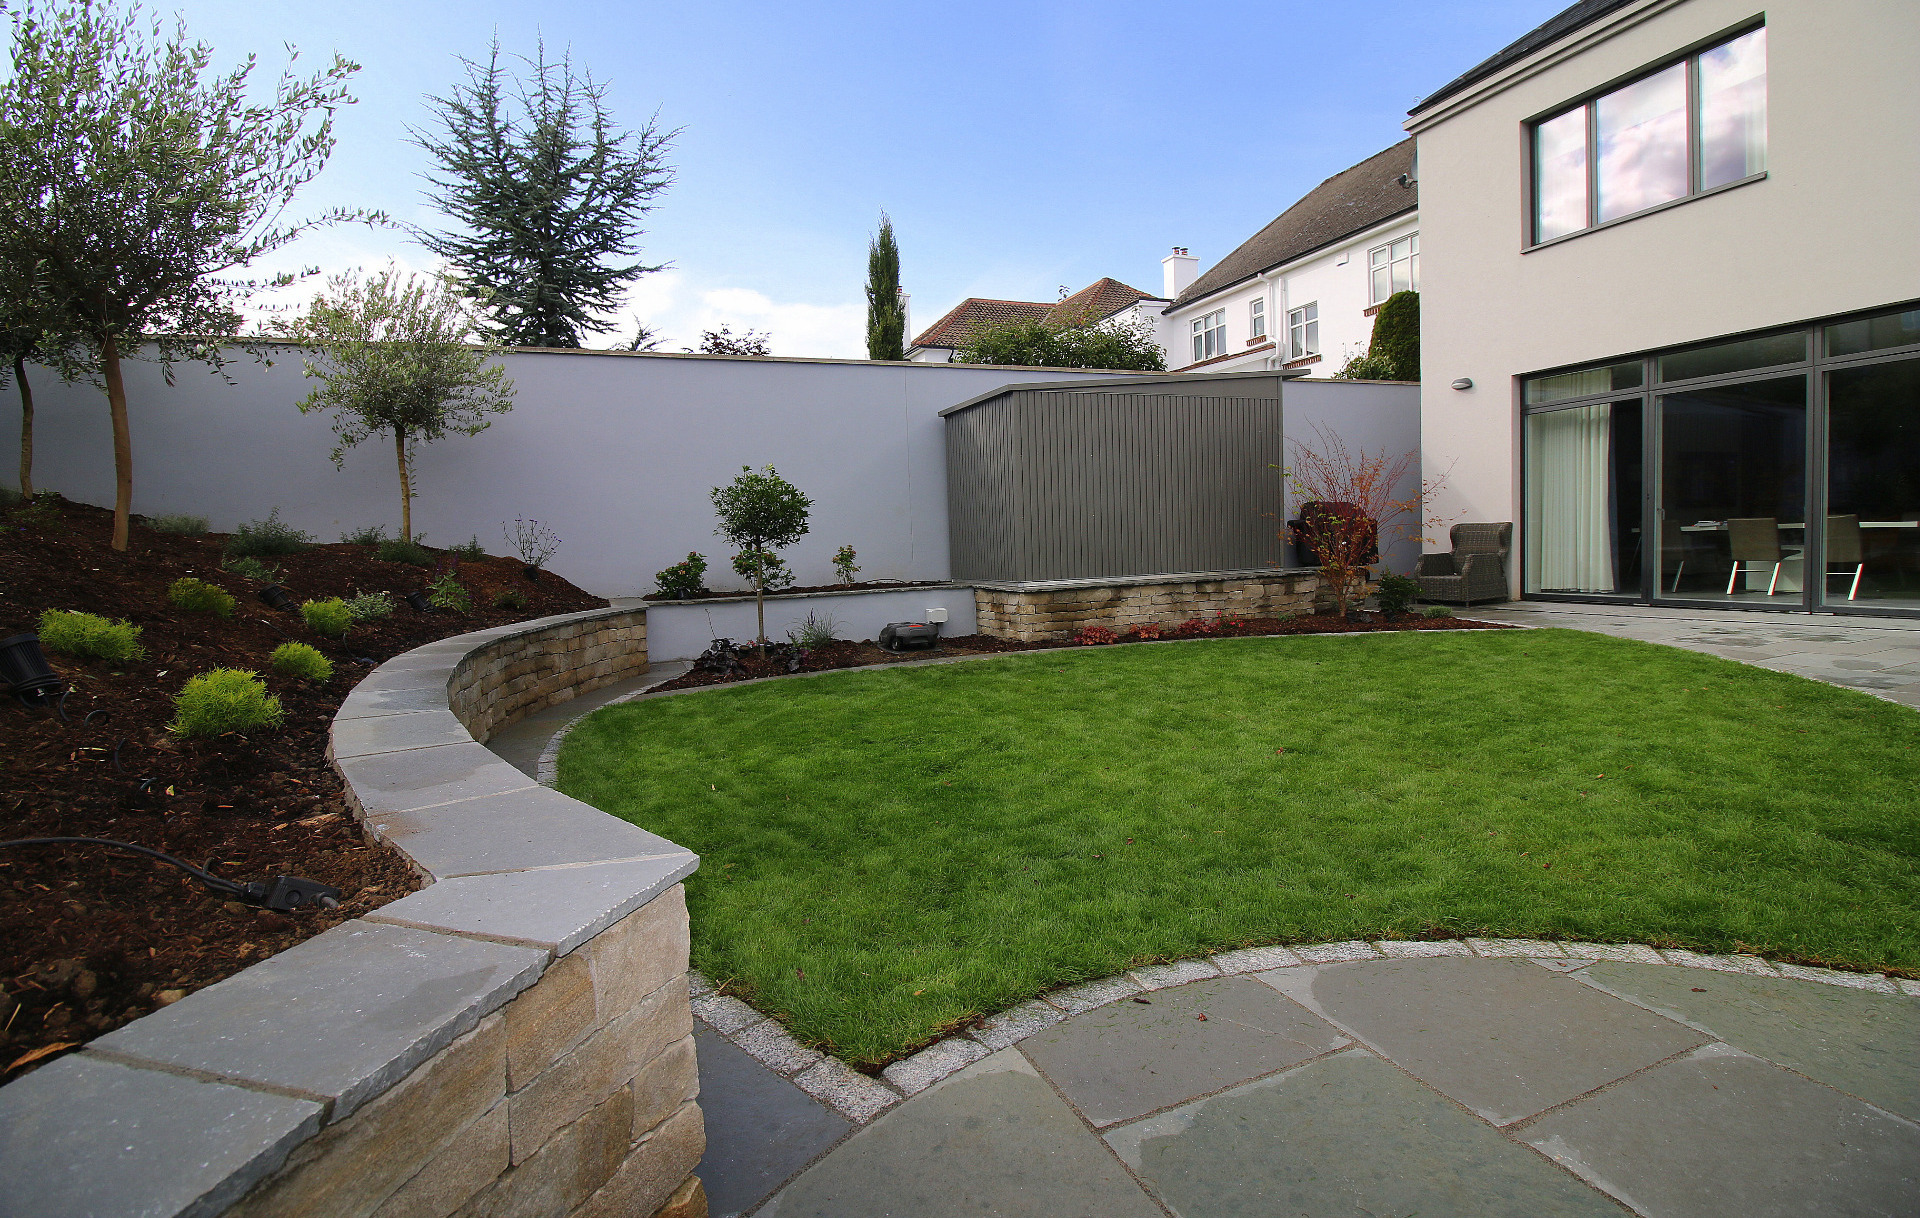 Distinctive curves are used very effectively to delineate key garden spaces & elements | Garden Design & Landscaping Rathfarnham